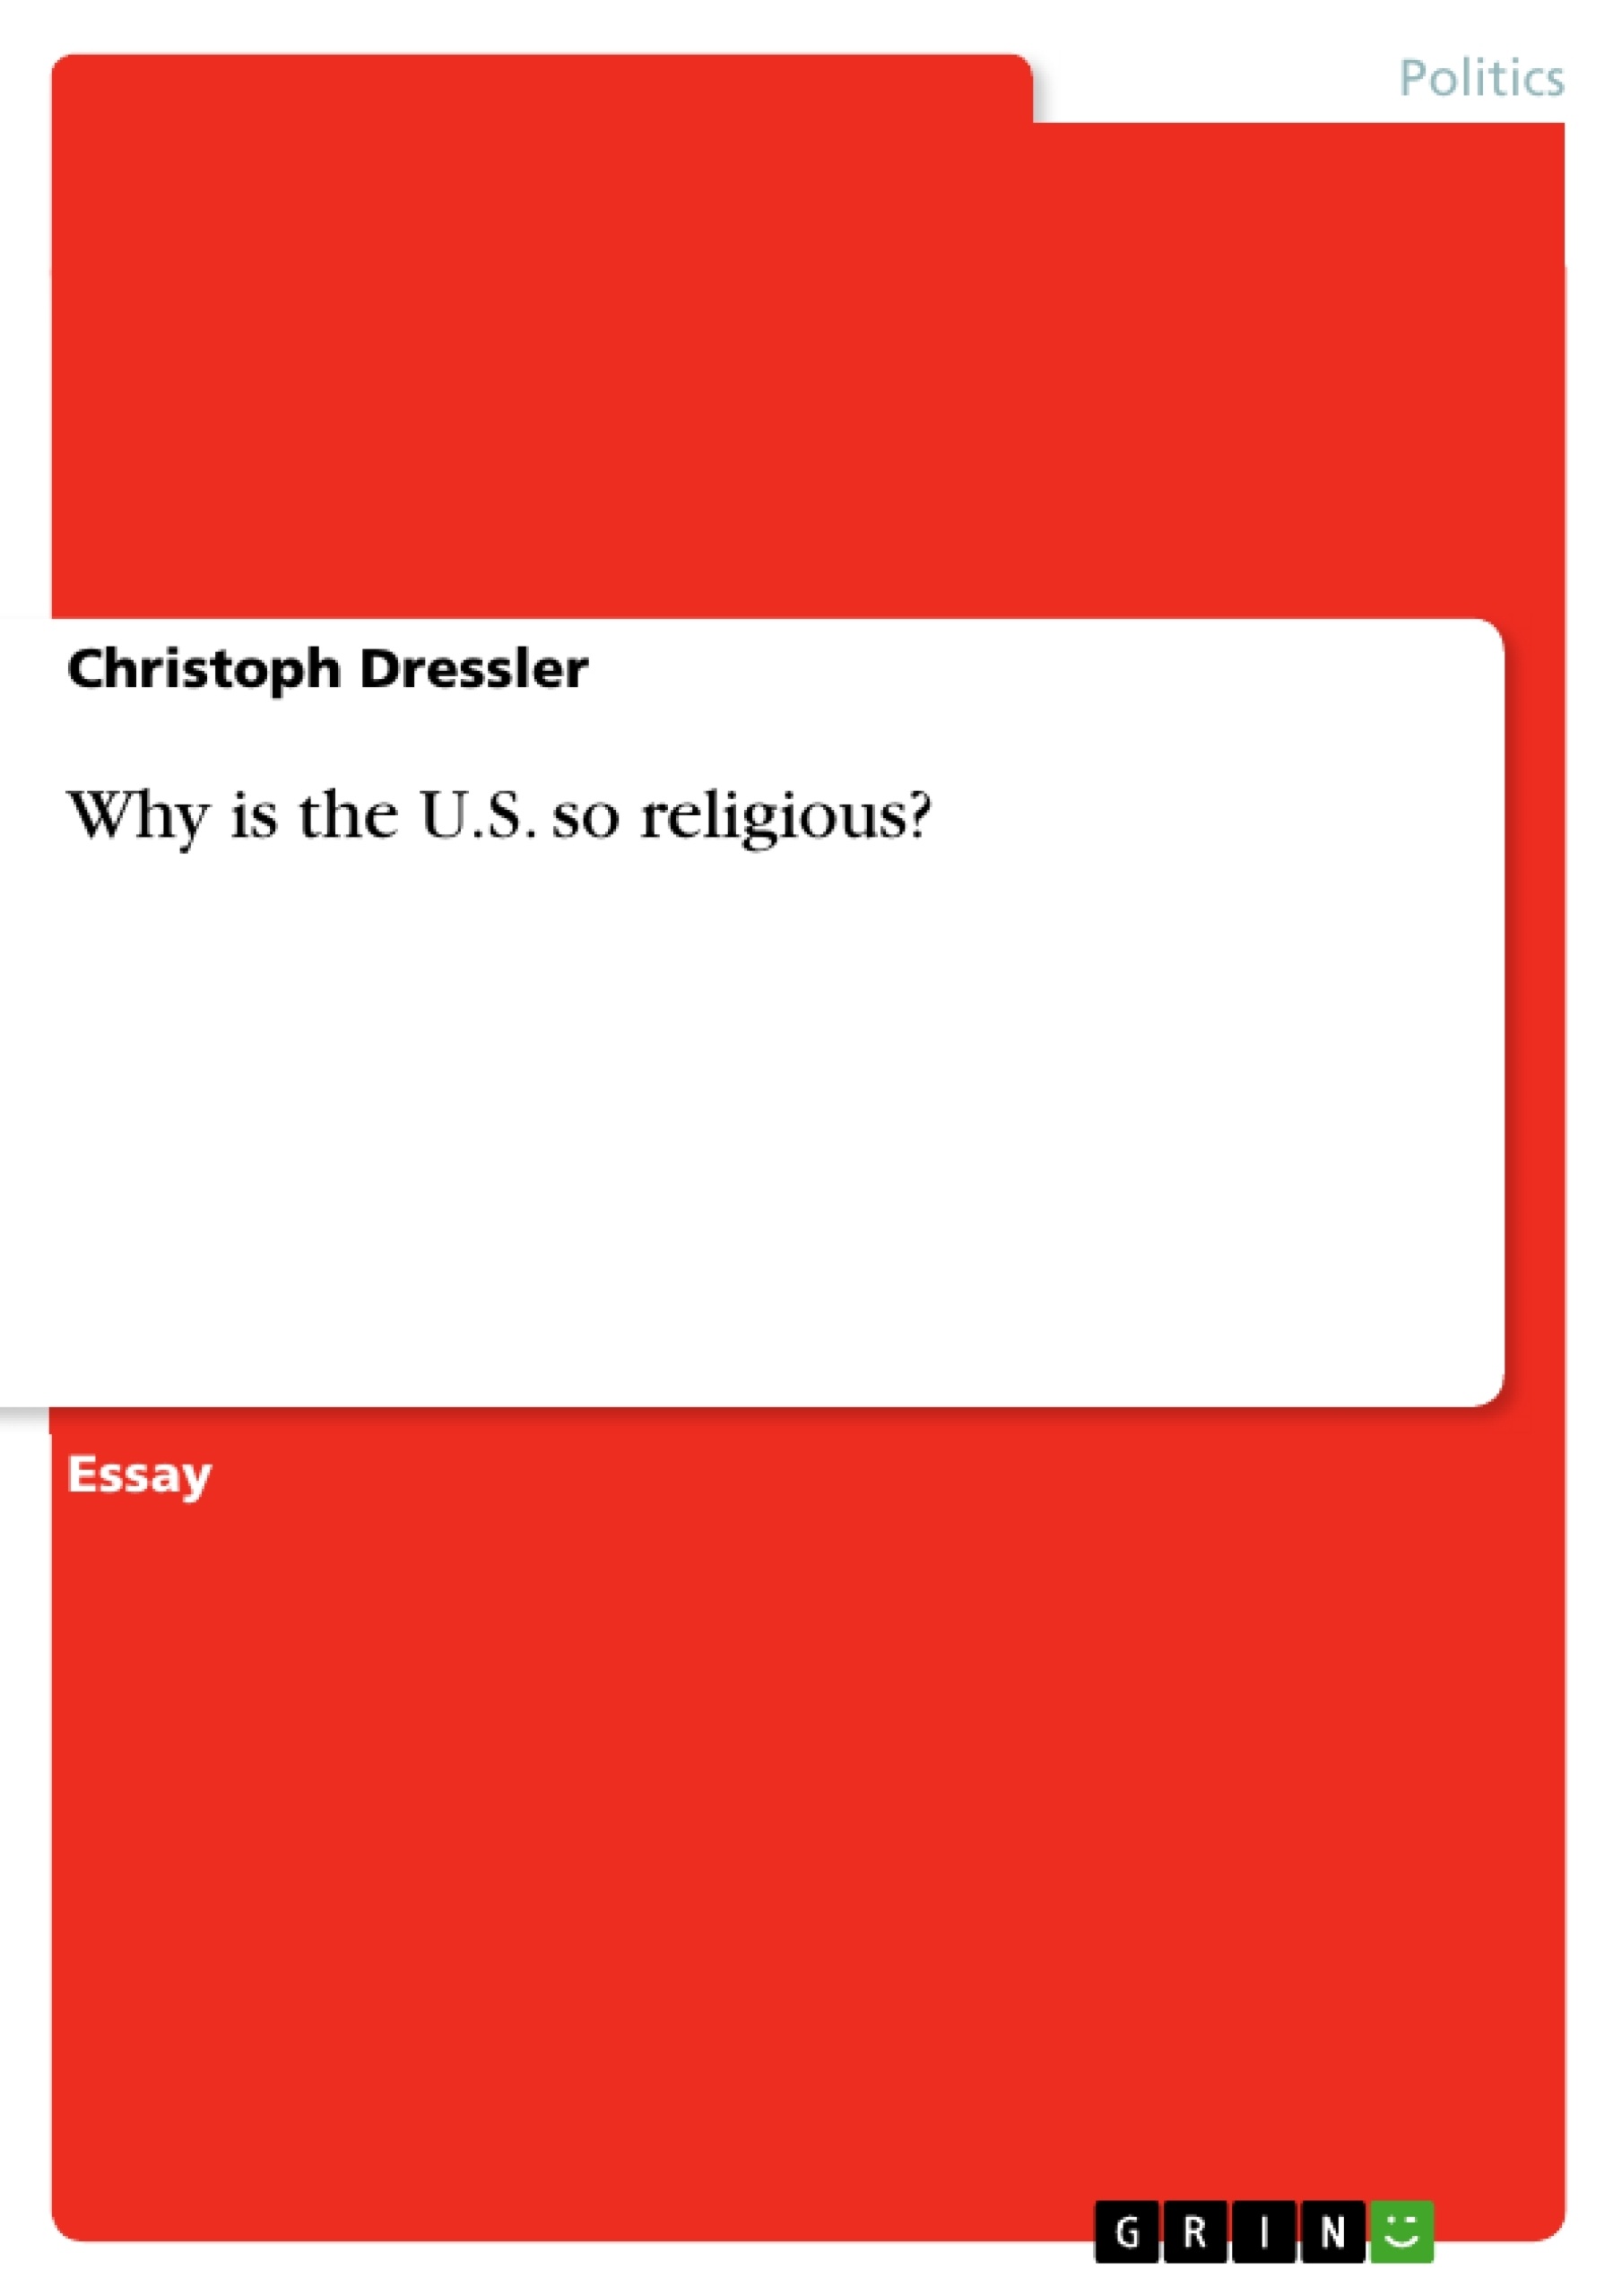 Title: Why is the U.S. so religious?